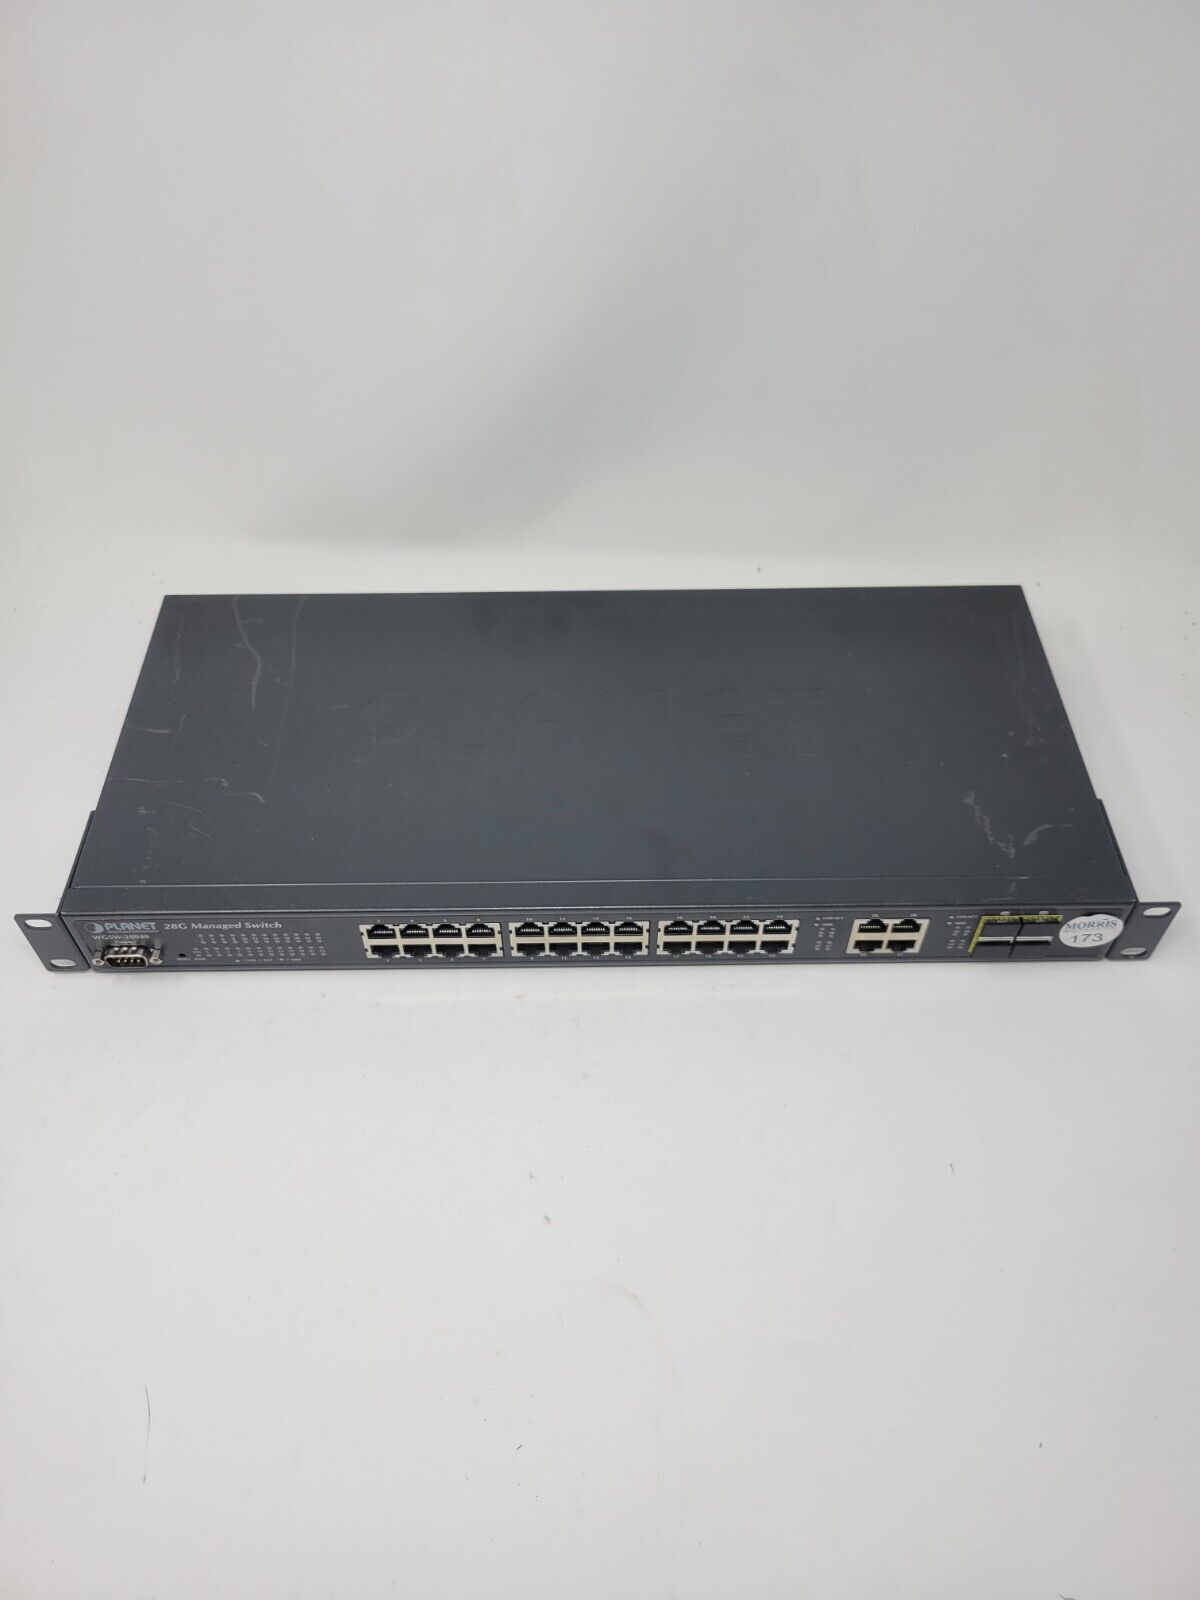 Planet Technology Corp Model WGSW-28040(V2) 28 Ports.